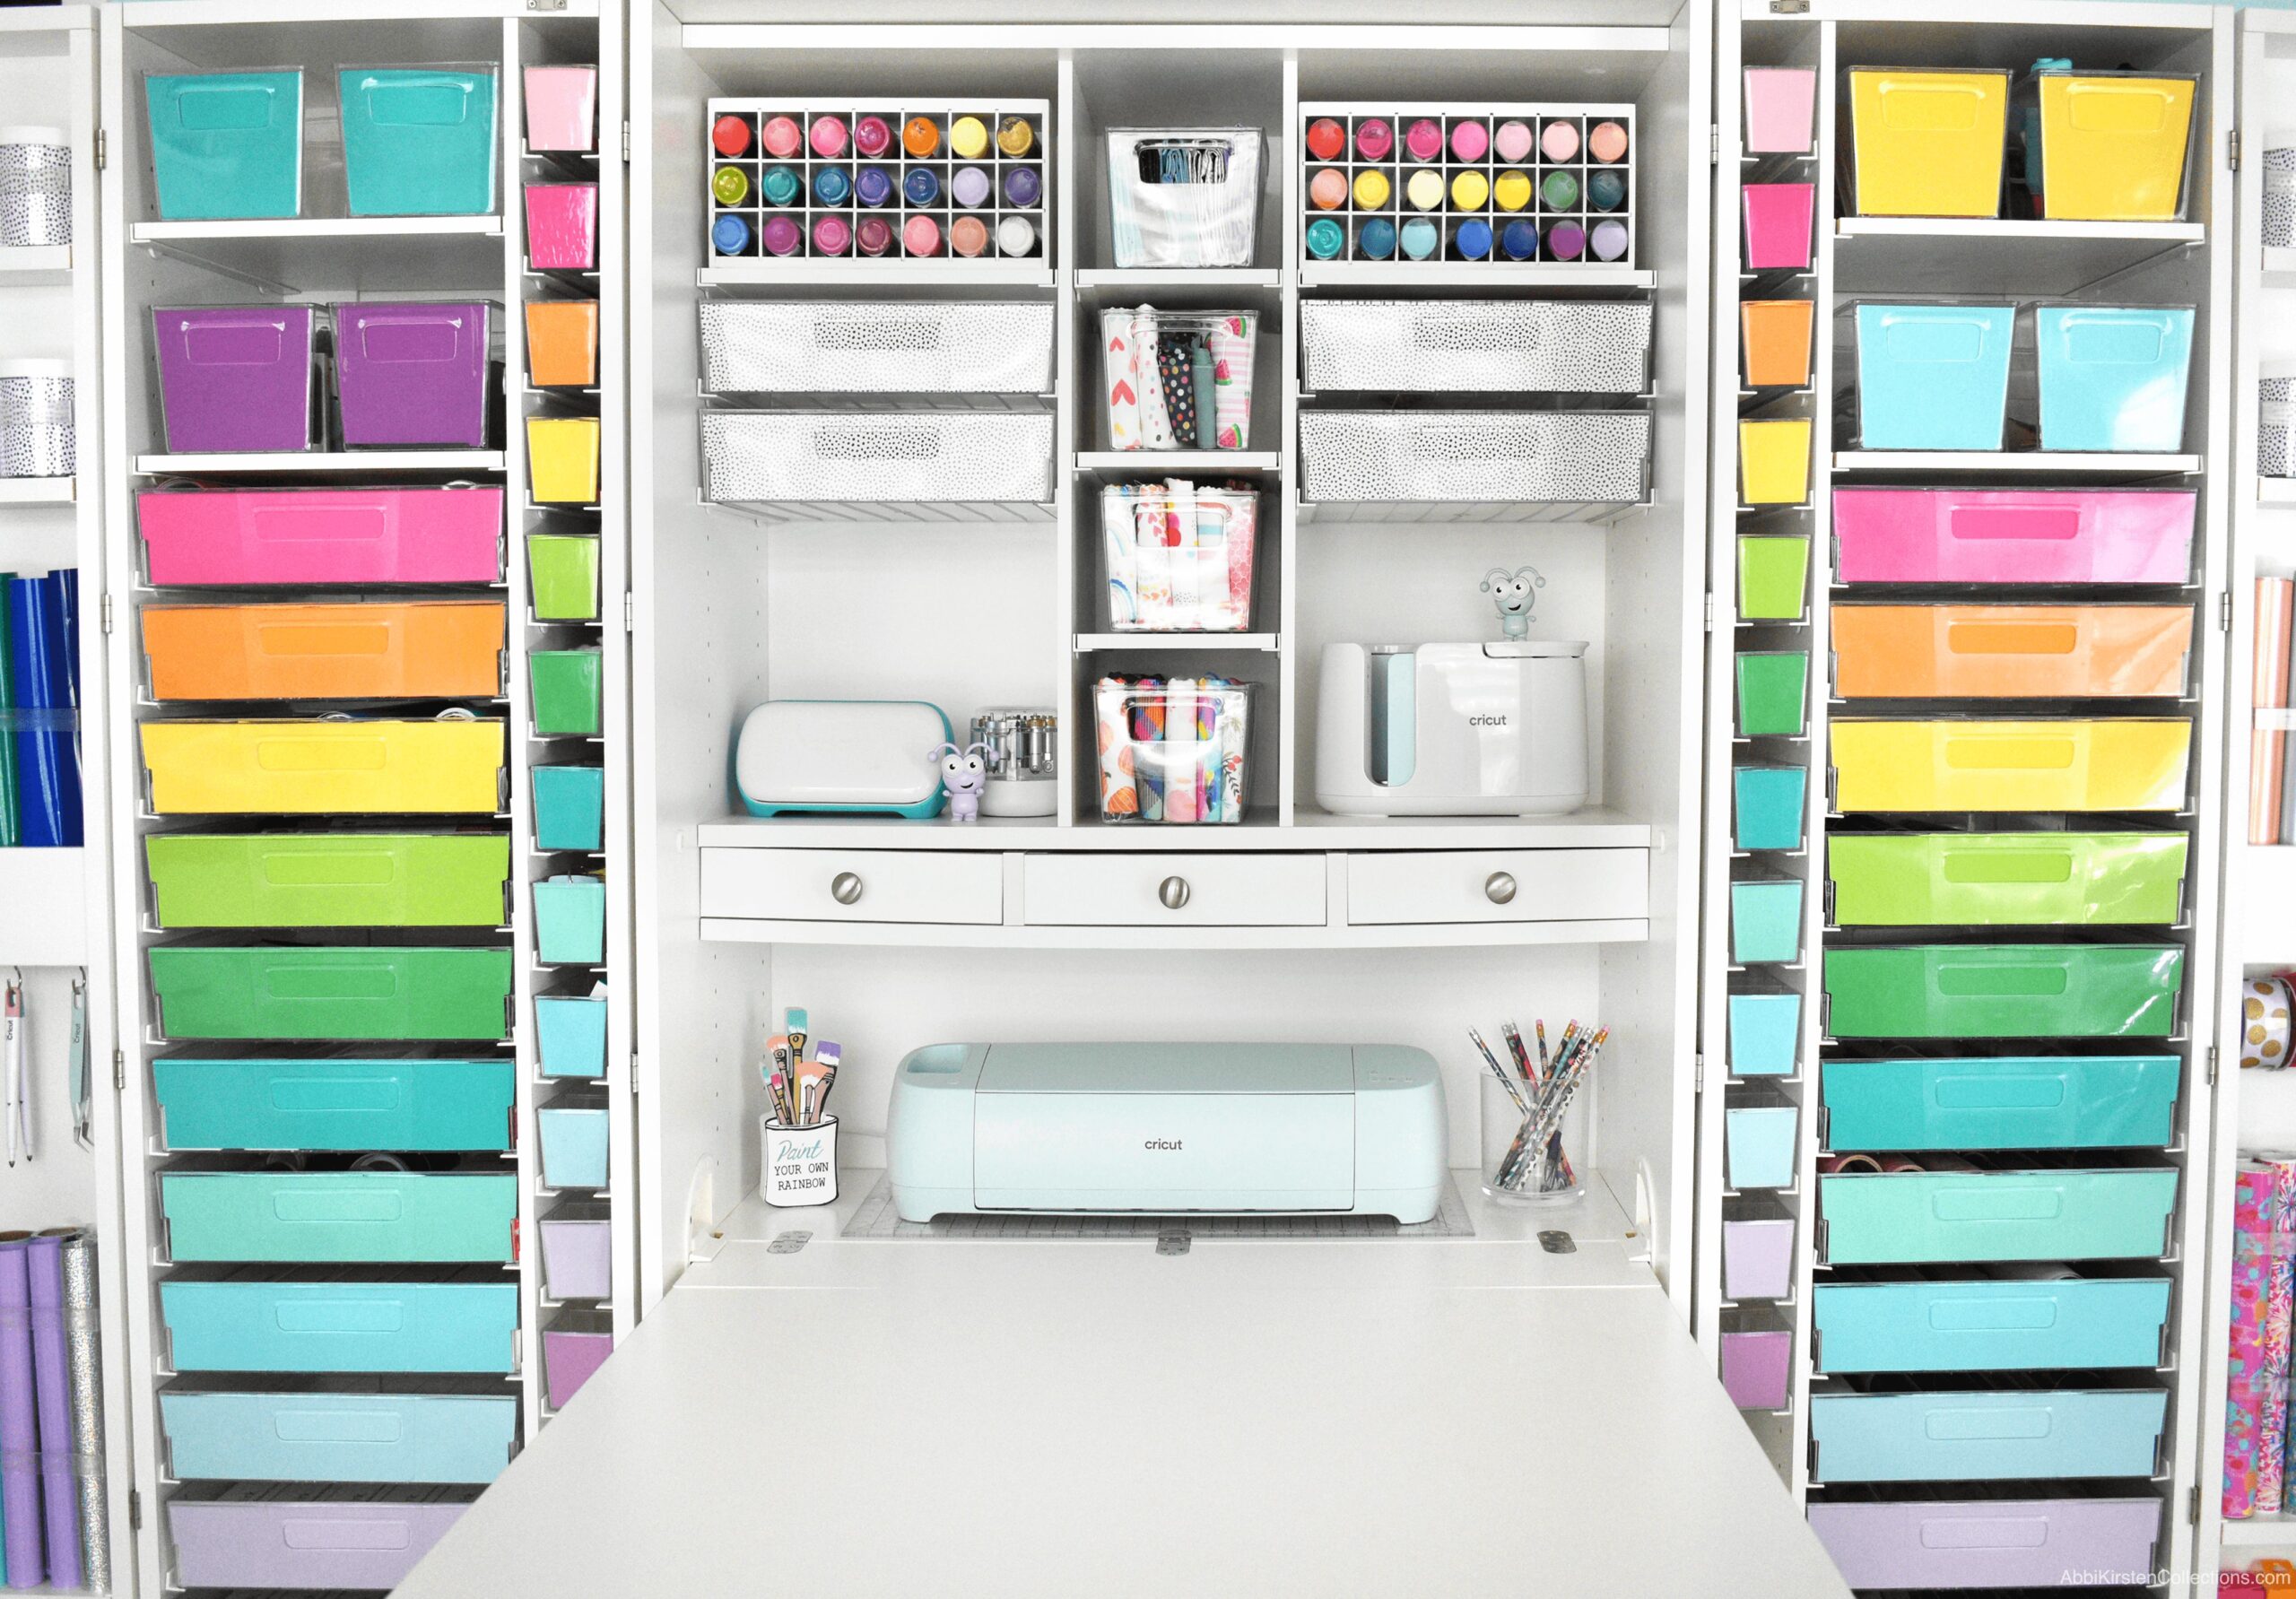 Dreambox Craft Room Storage Cabinet Review Story - Abbi Kirsten Collections